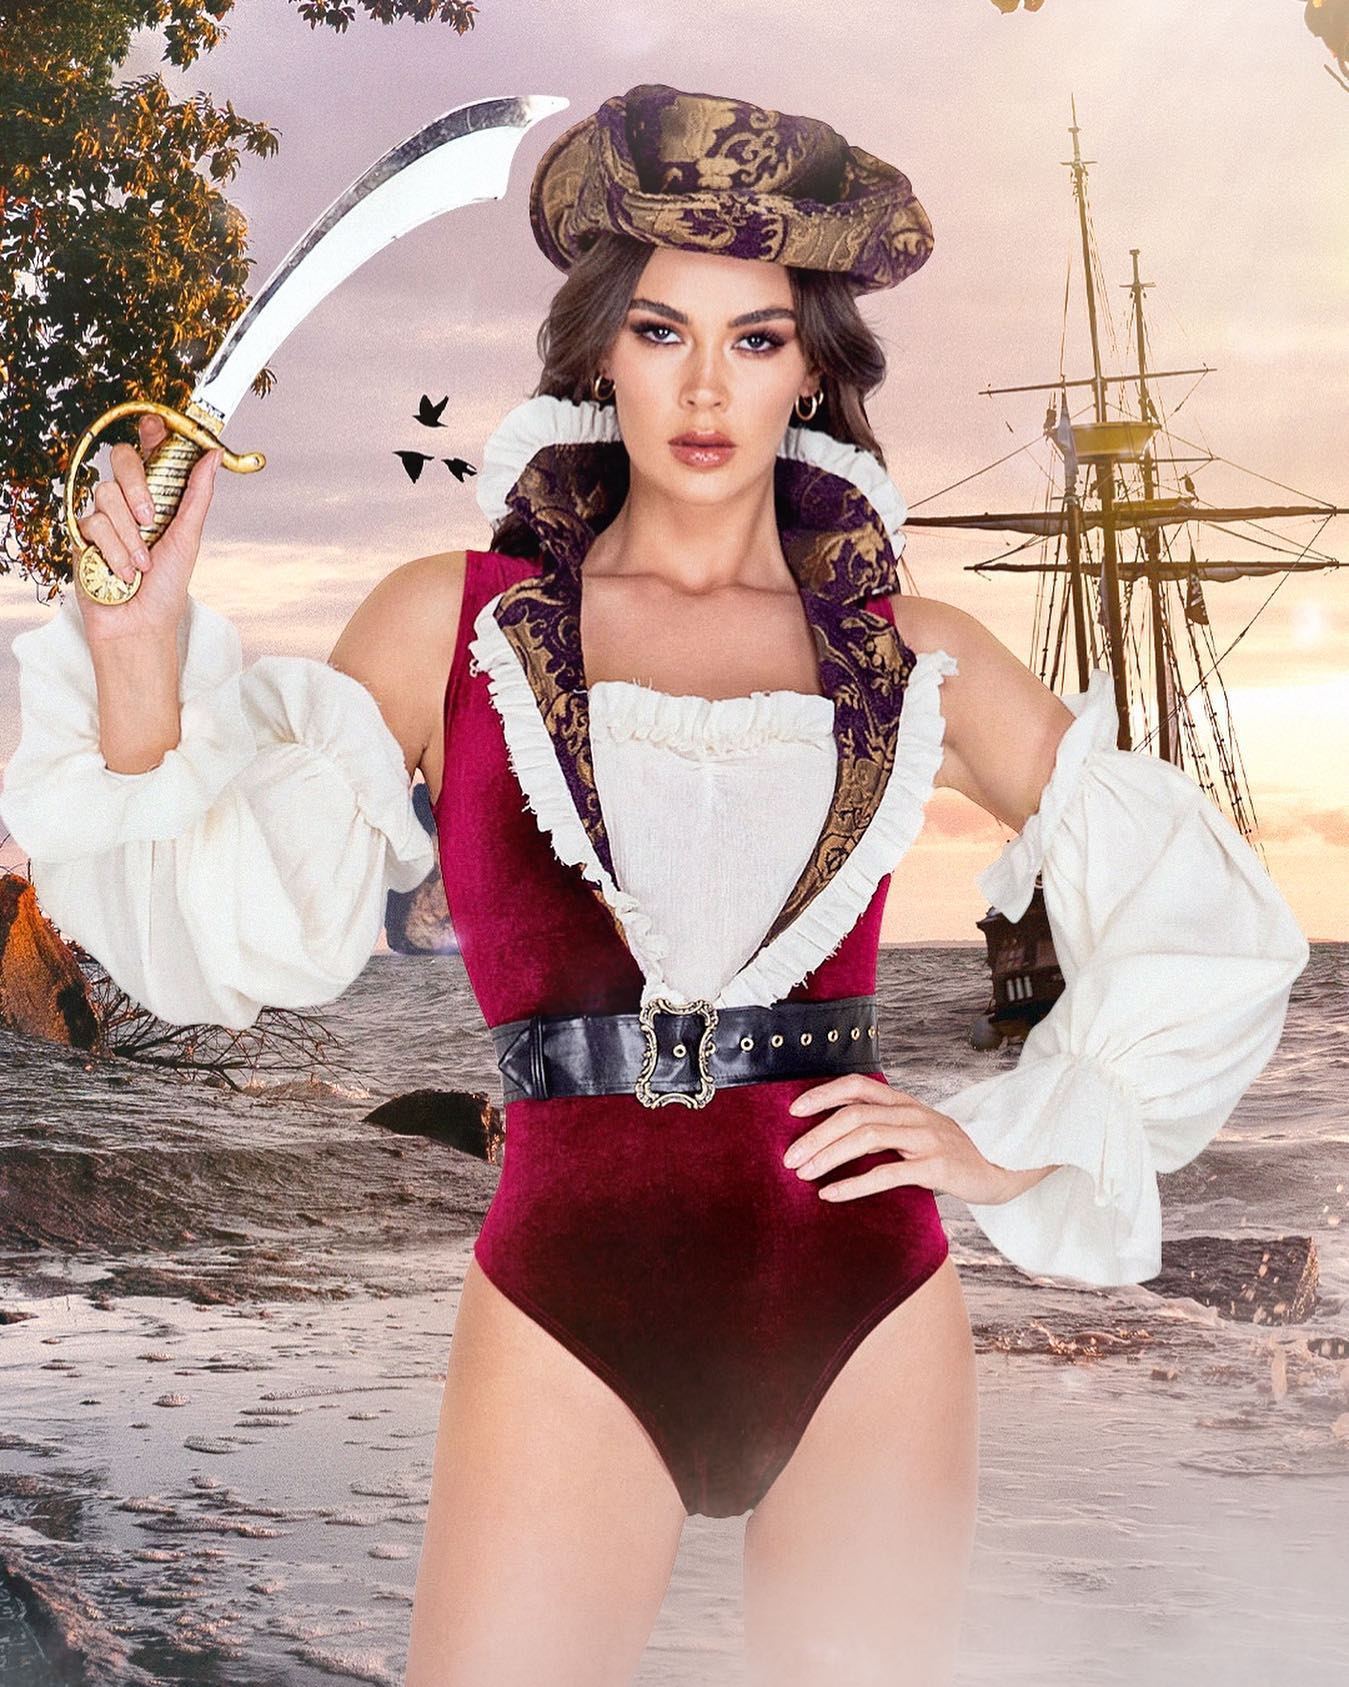 5pc Sultry Pirate Costume